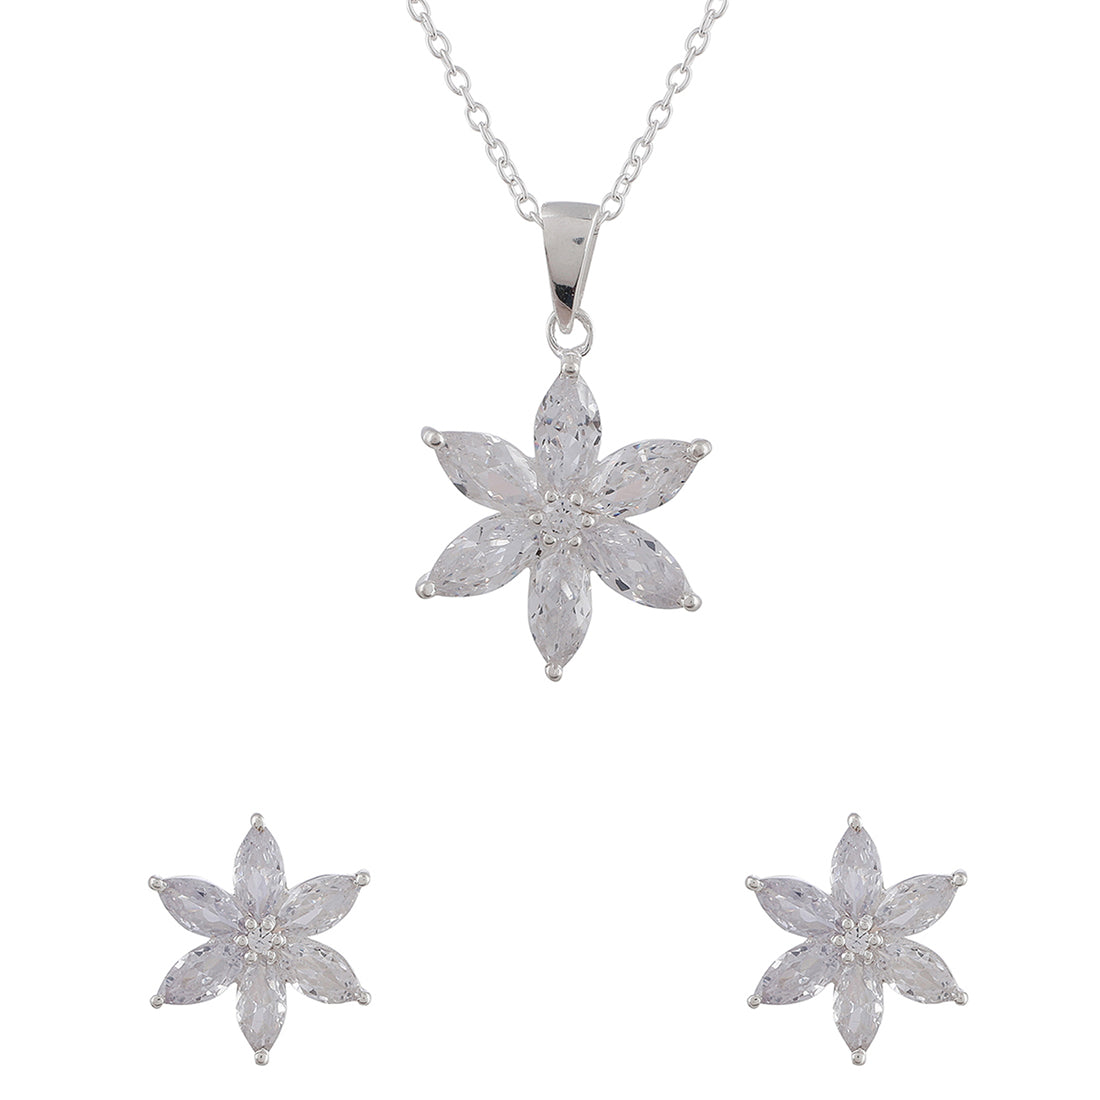 Women's Floral Motif Silver Plated 925 Sterling Silver Necklace Set - Voylla